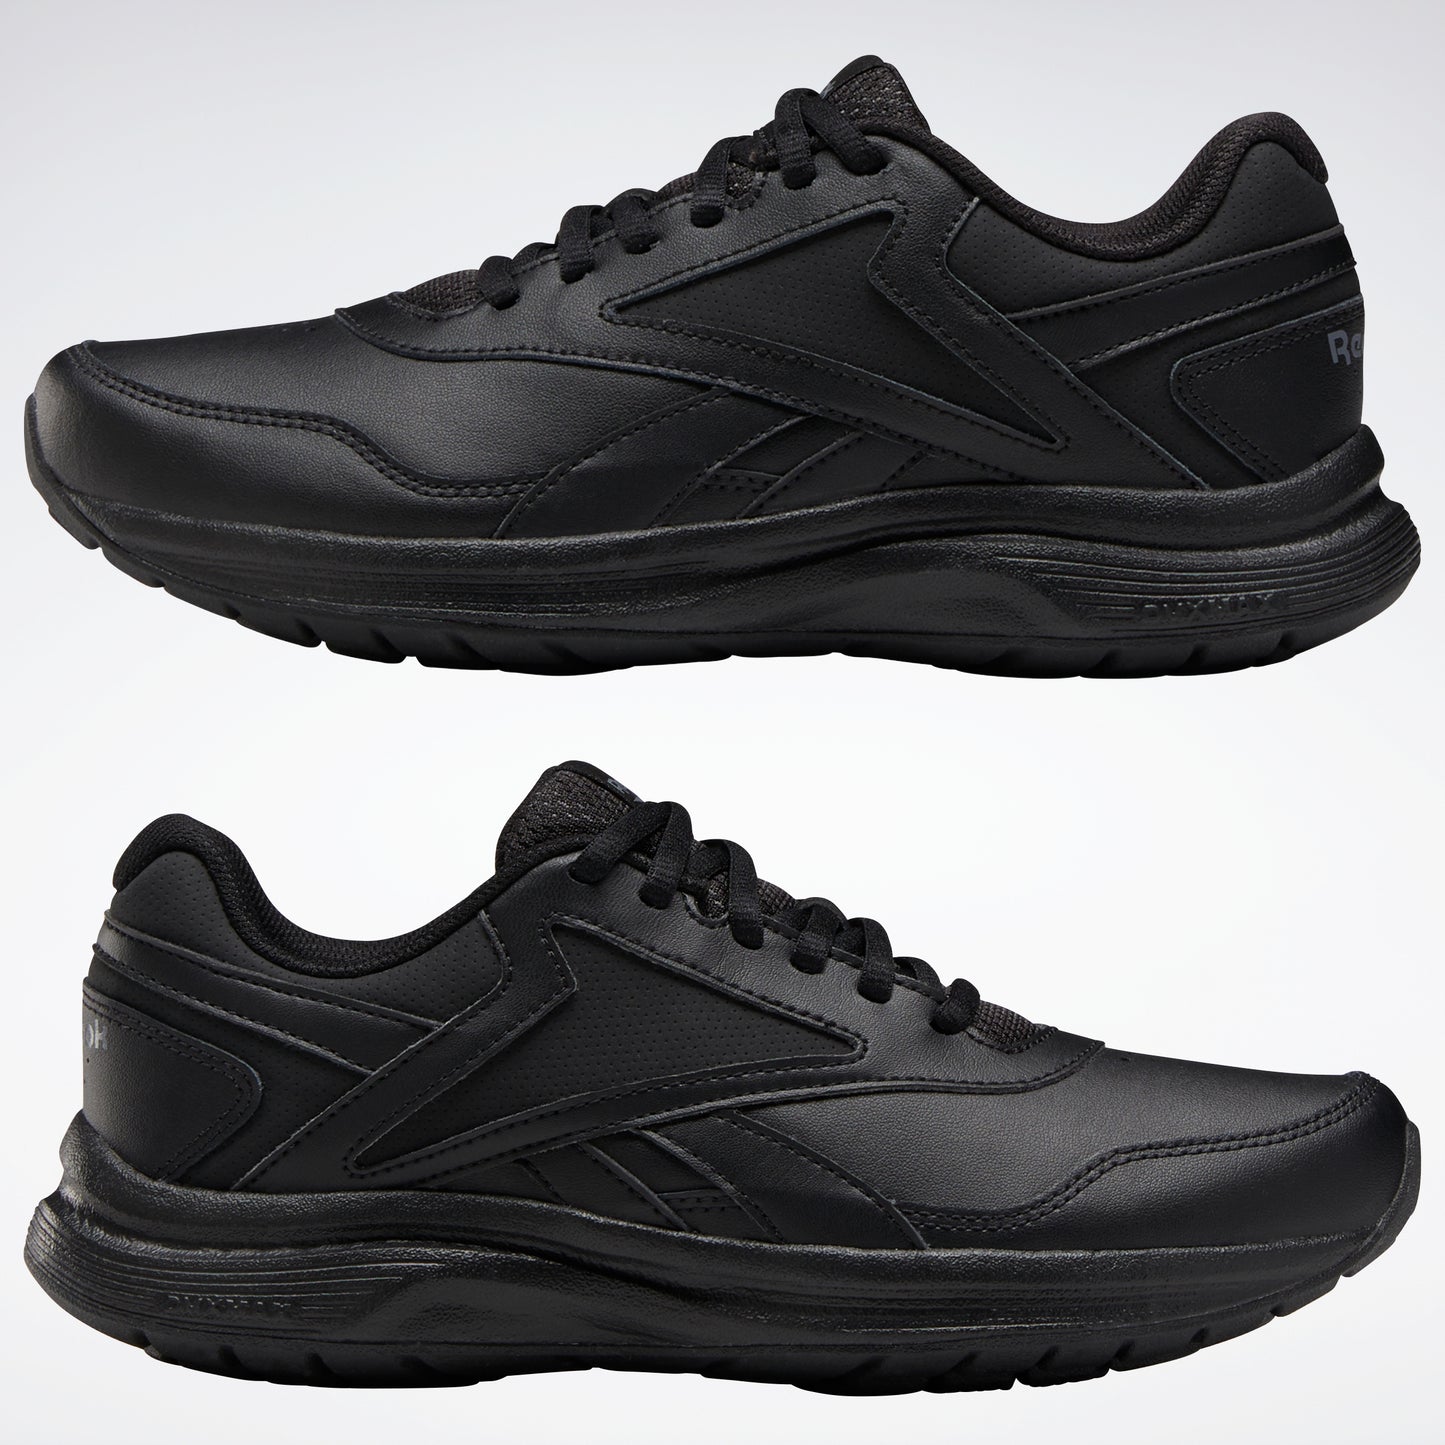 Chaussures Reebok Women Walk Ultra 7.0 Dmx Max Chaussures Noirs/Cdgry5/Croyal